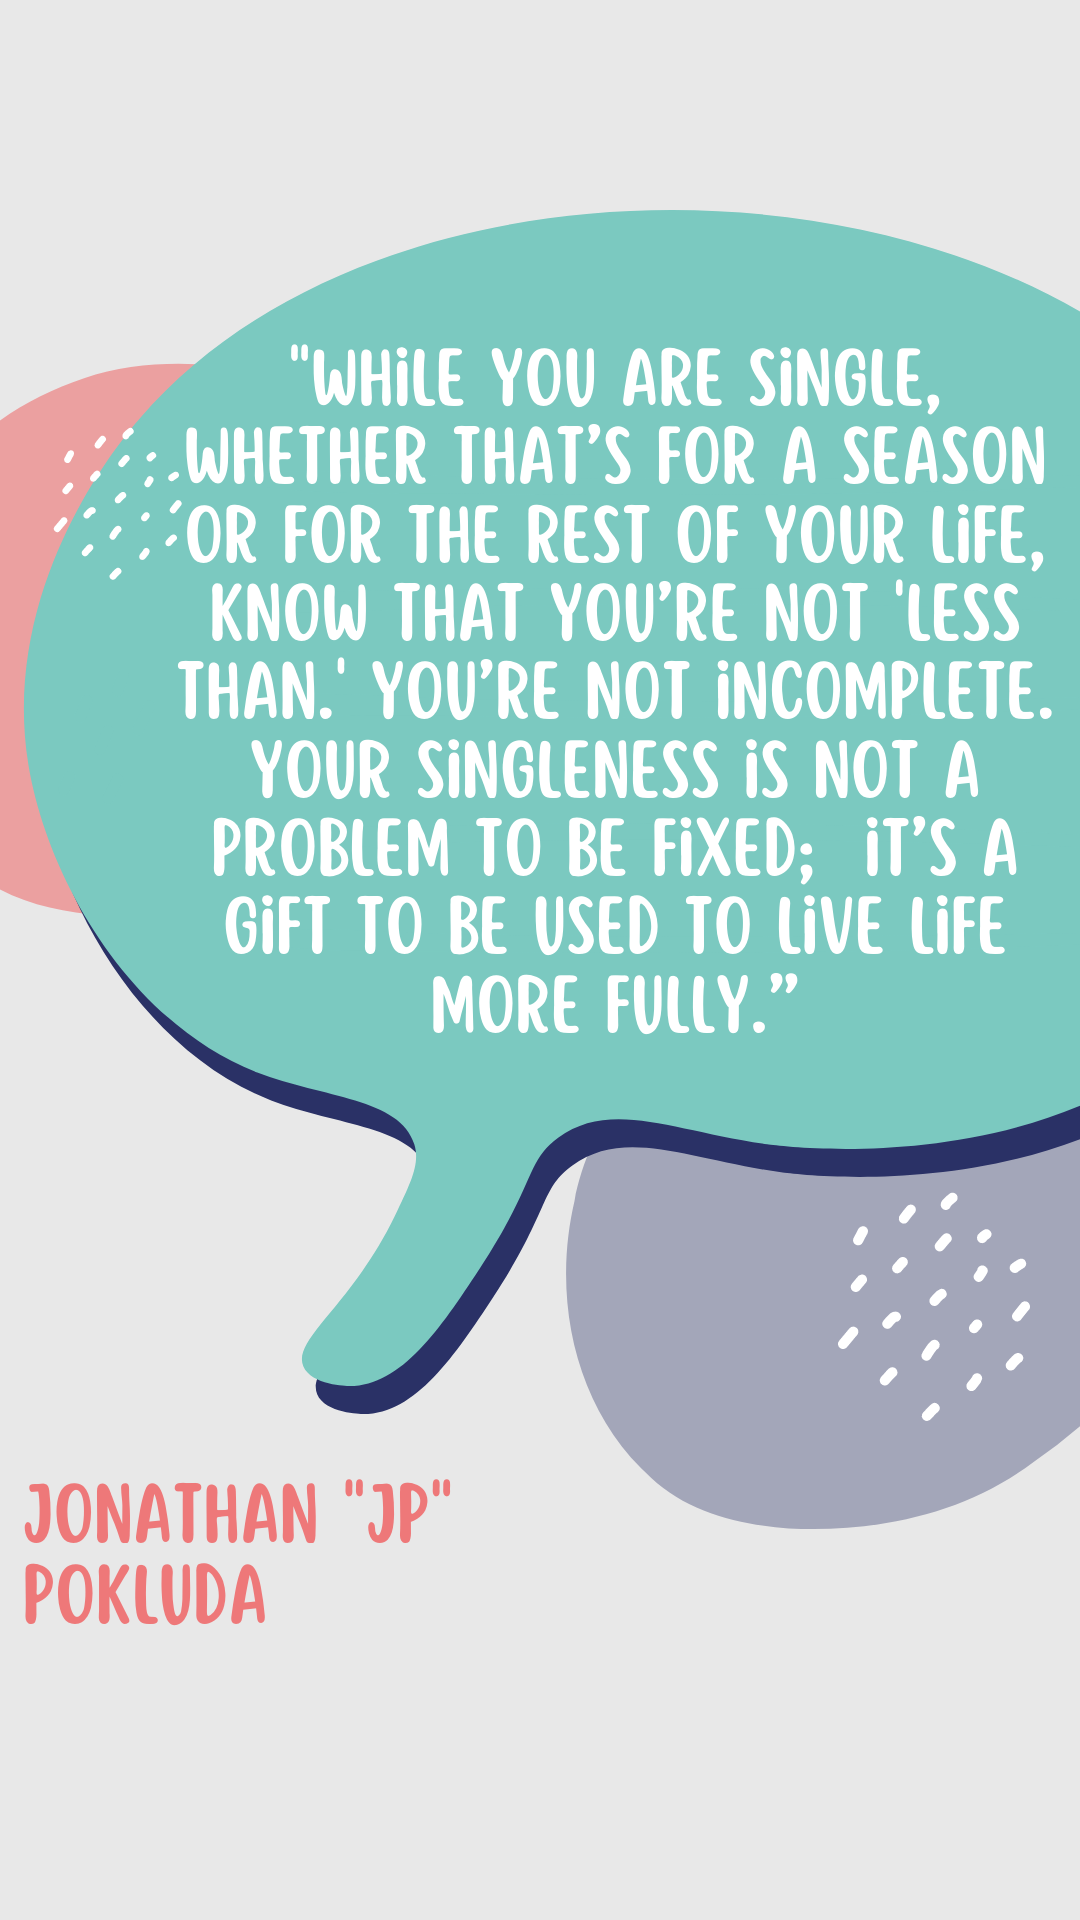 “While you are single, whether that’s for a season or for the rest of your life, know that you’re not ‘less than.’ You’re not incomplete. Your singleness is not a problem to be fixed; it’s a gift to be used to live life more fully,” says Jonathan “JP” Pokluda.